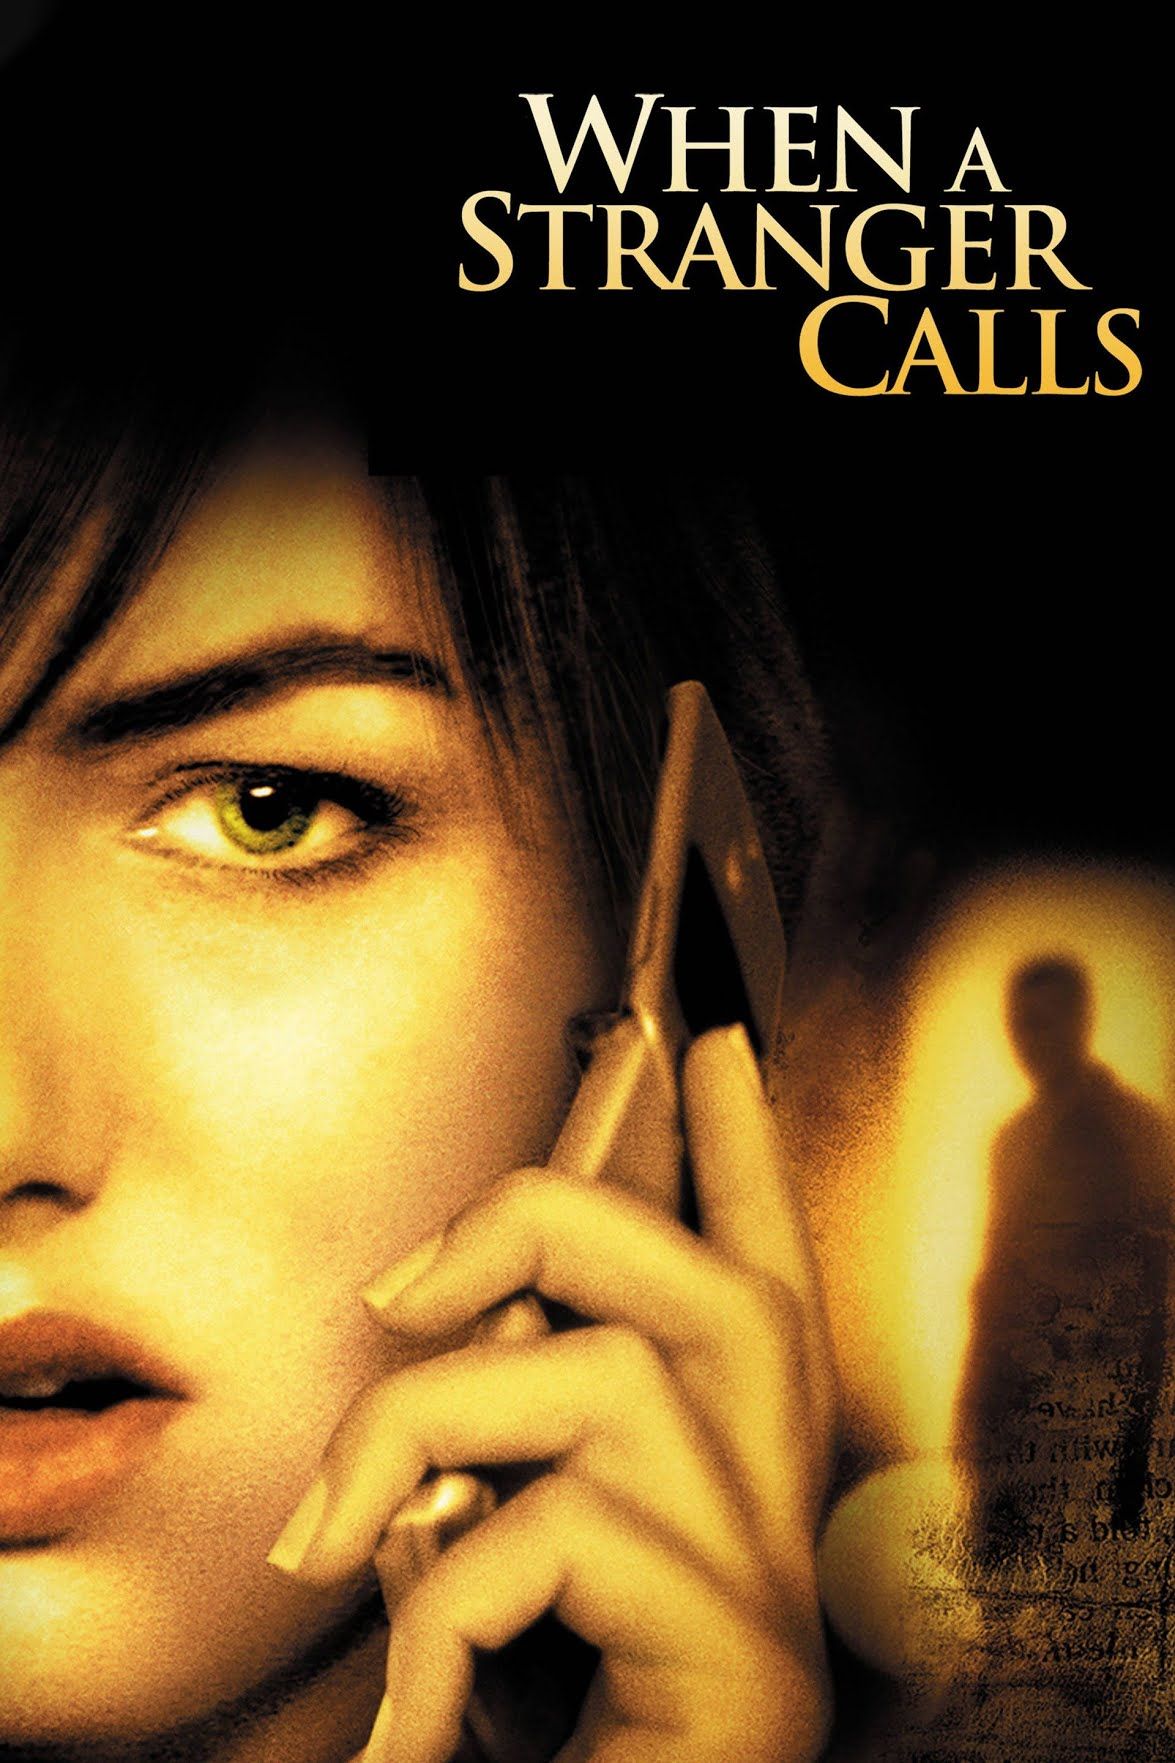 When a Stranger Calls (2006) Hindi Dubbed BRRip download full movie